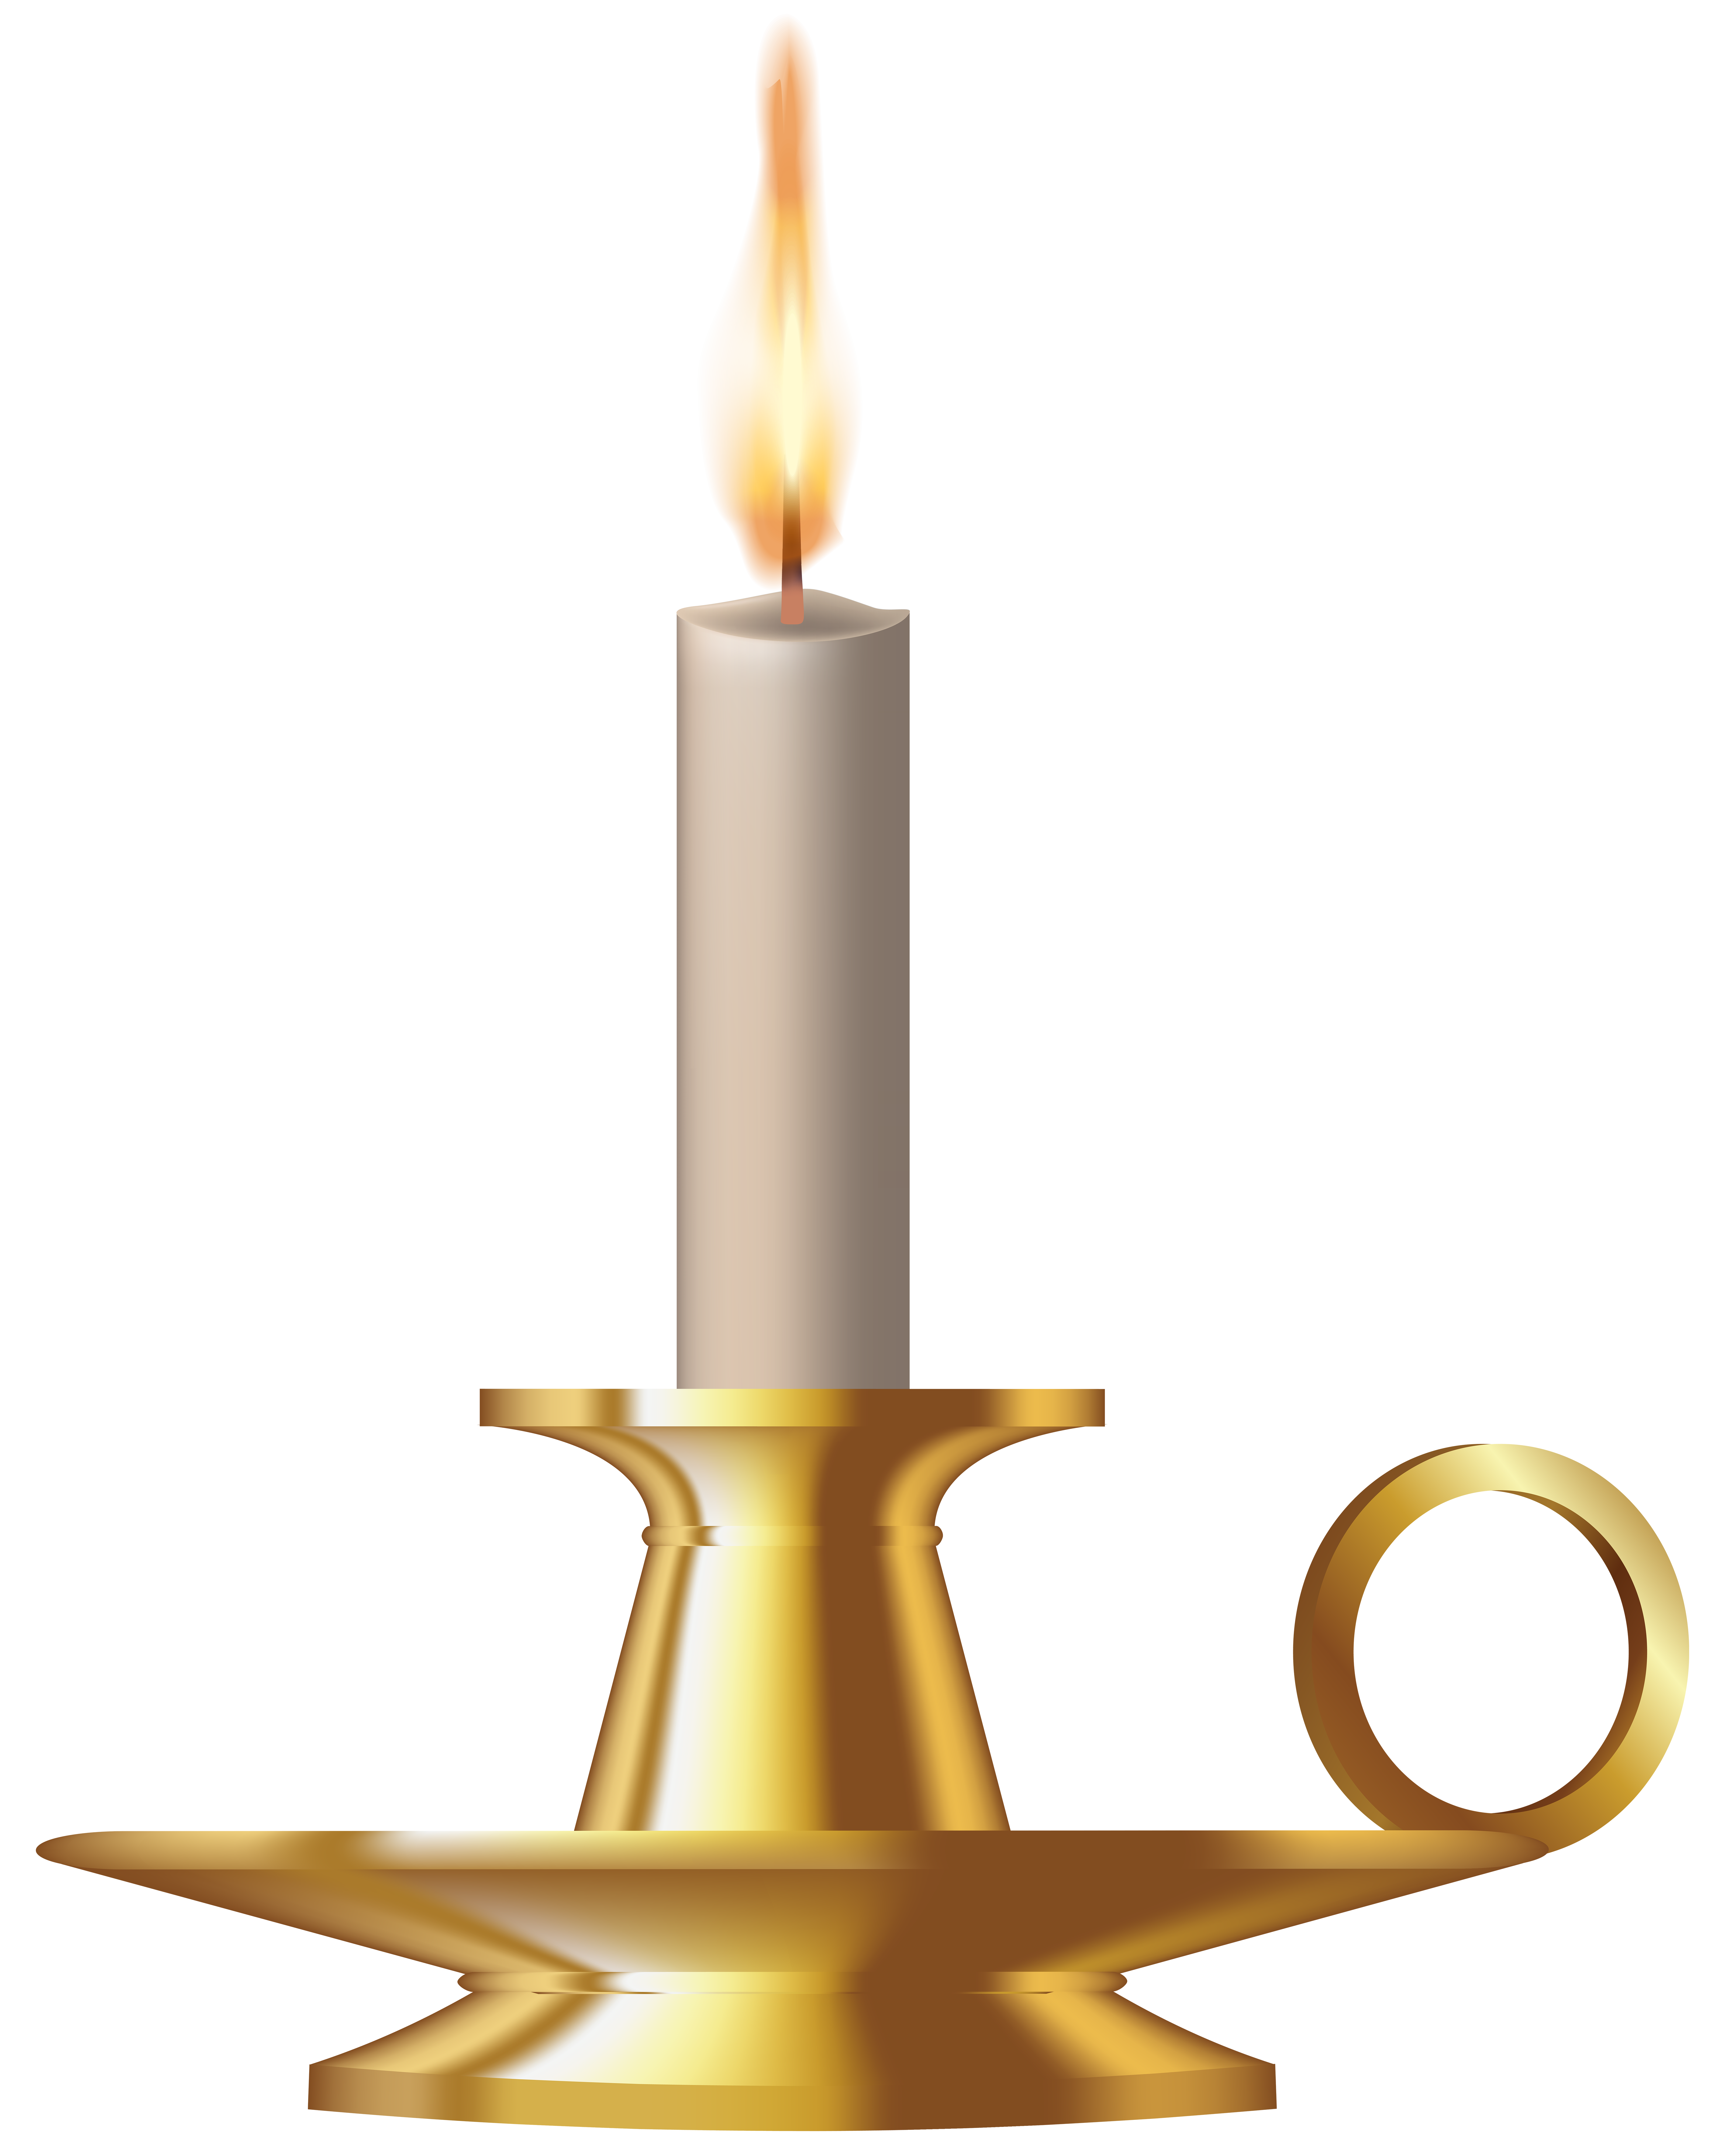 Candle in Candlestick Clip Art.